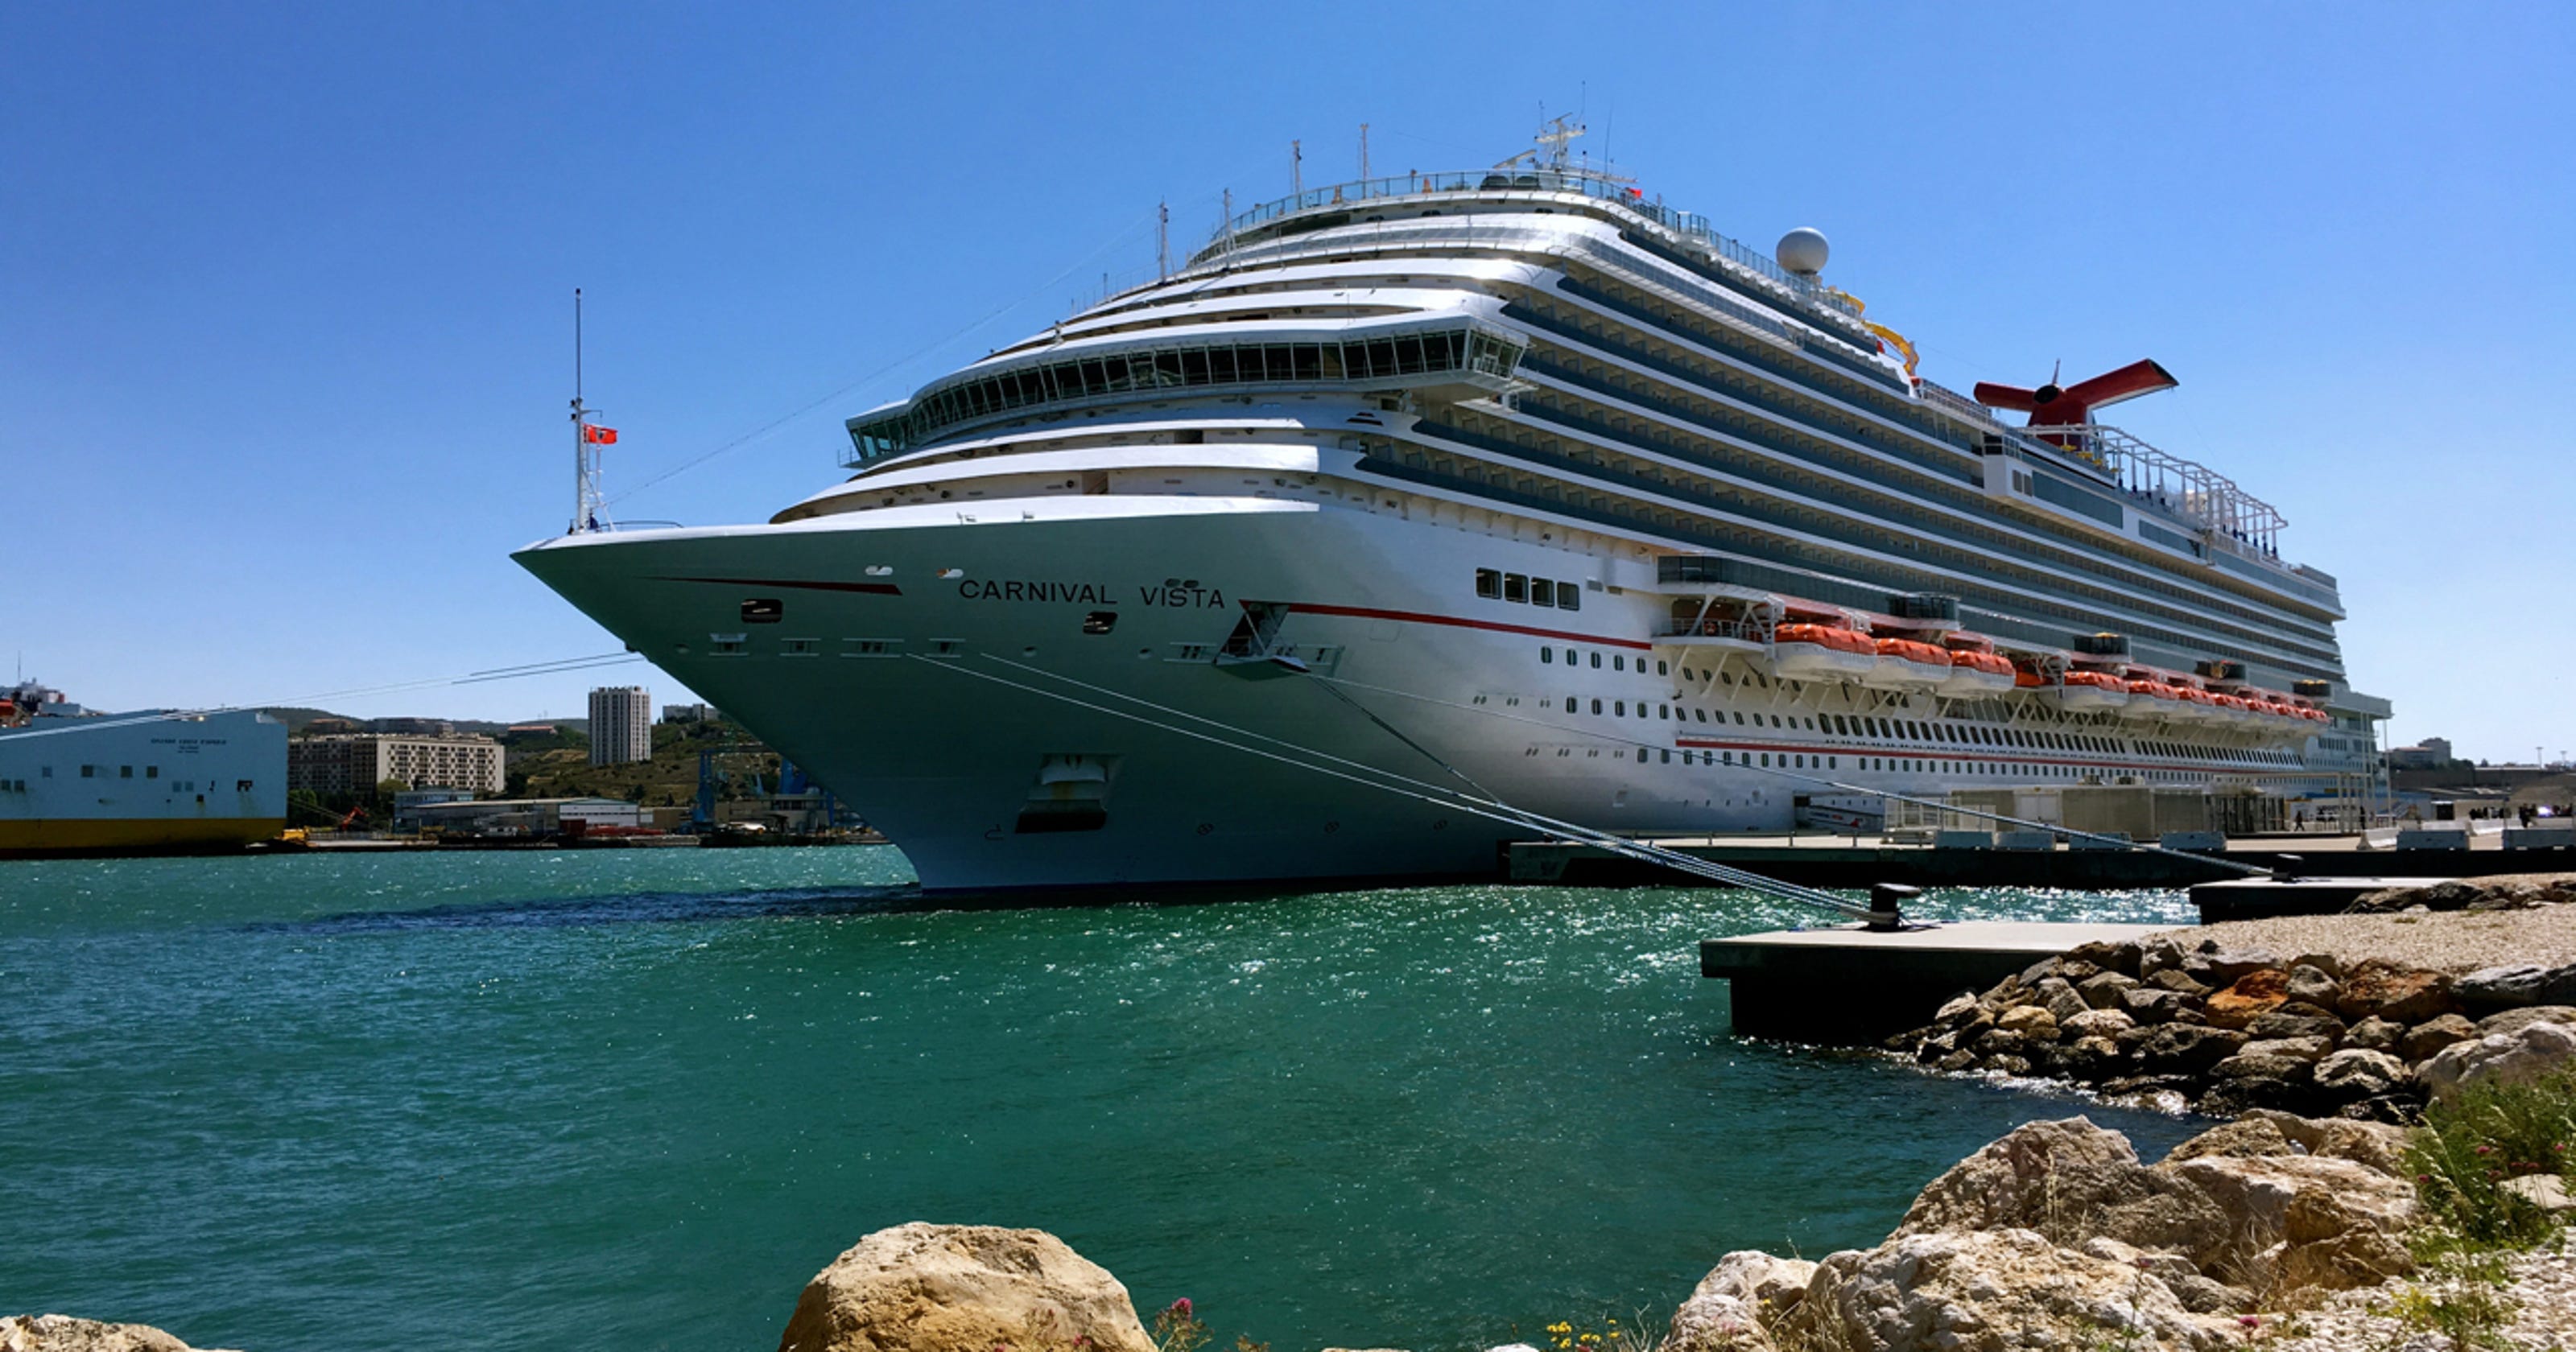 tours of cruise ships